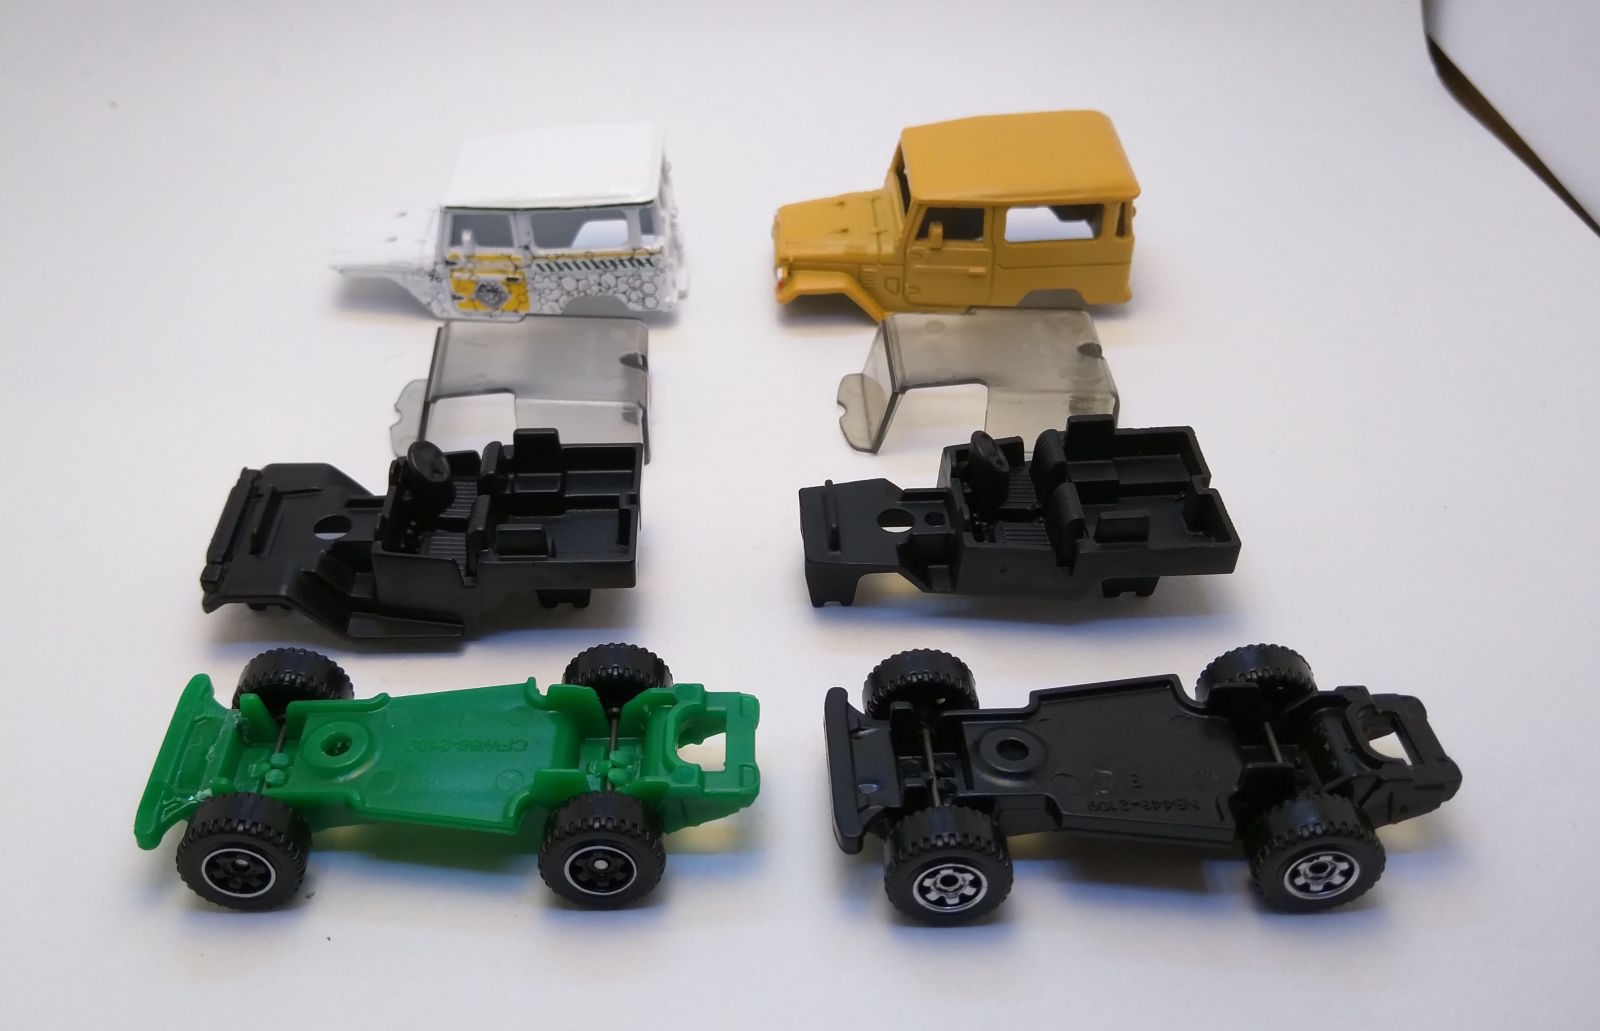 Illustration for article titled The FJ40 Old/New Tool Comparison; or How Matchbox Ruined a Legend